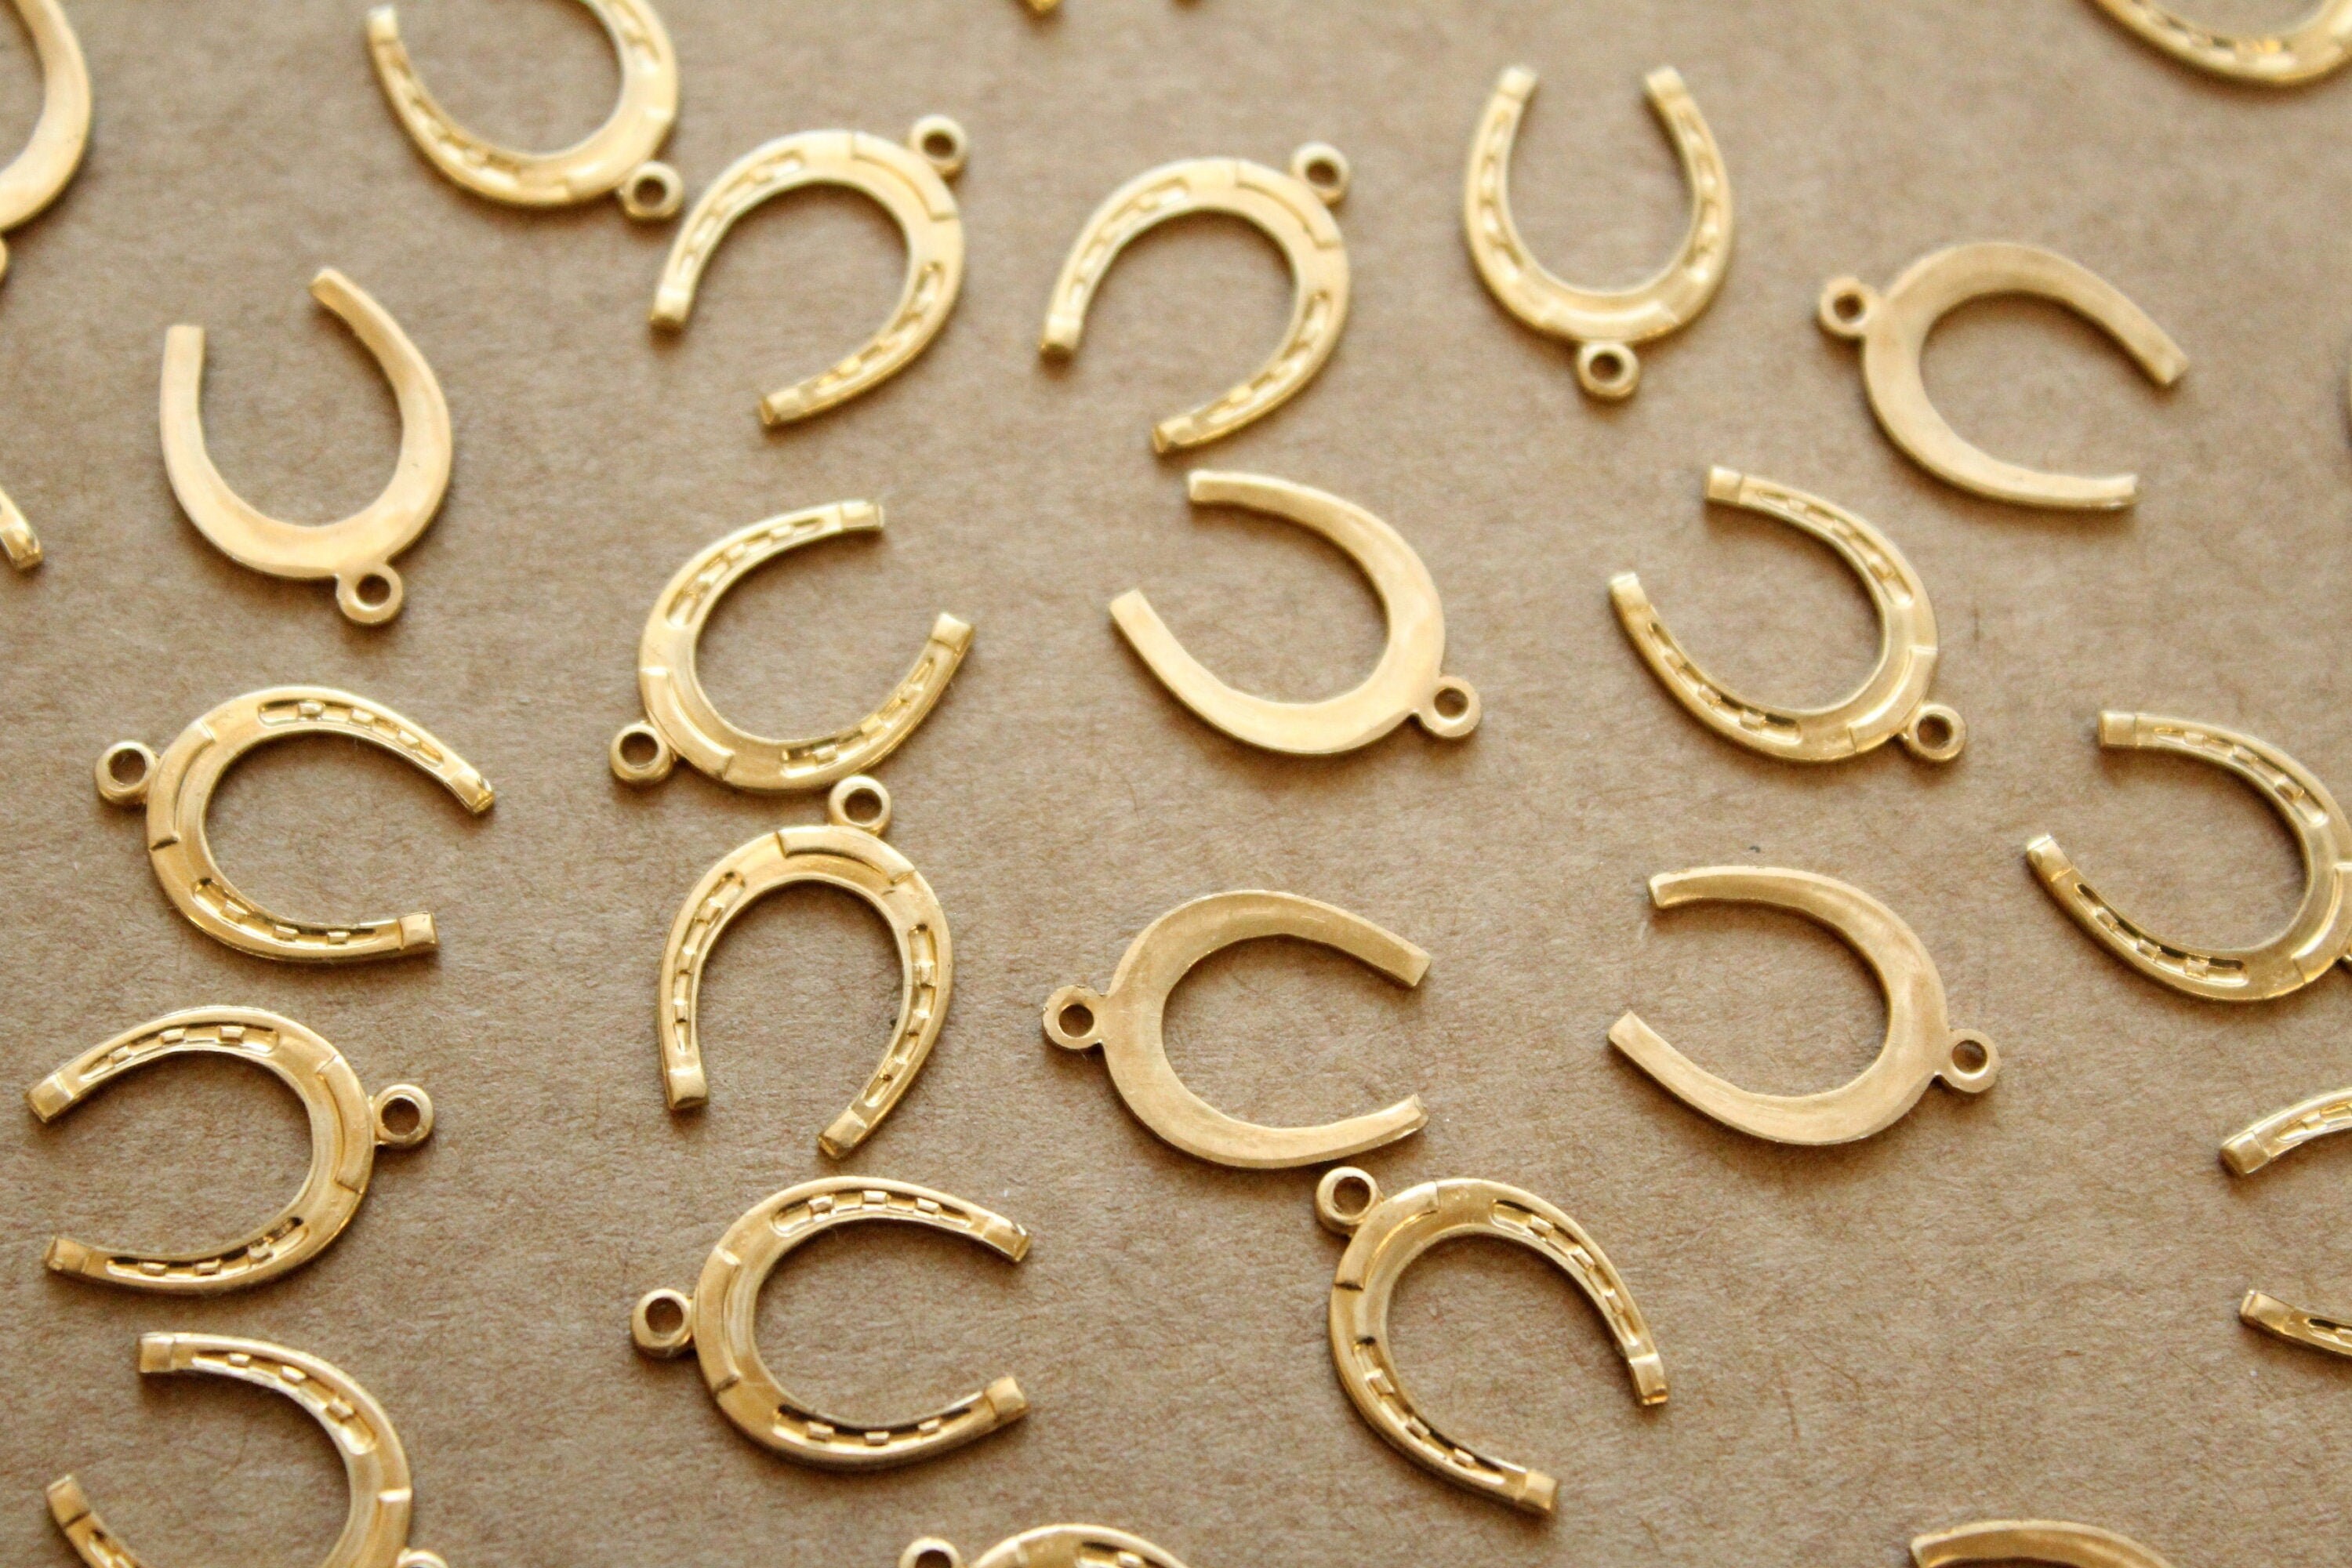 10pc horseshoe charm gold, good luck charms, lucky charms, horse